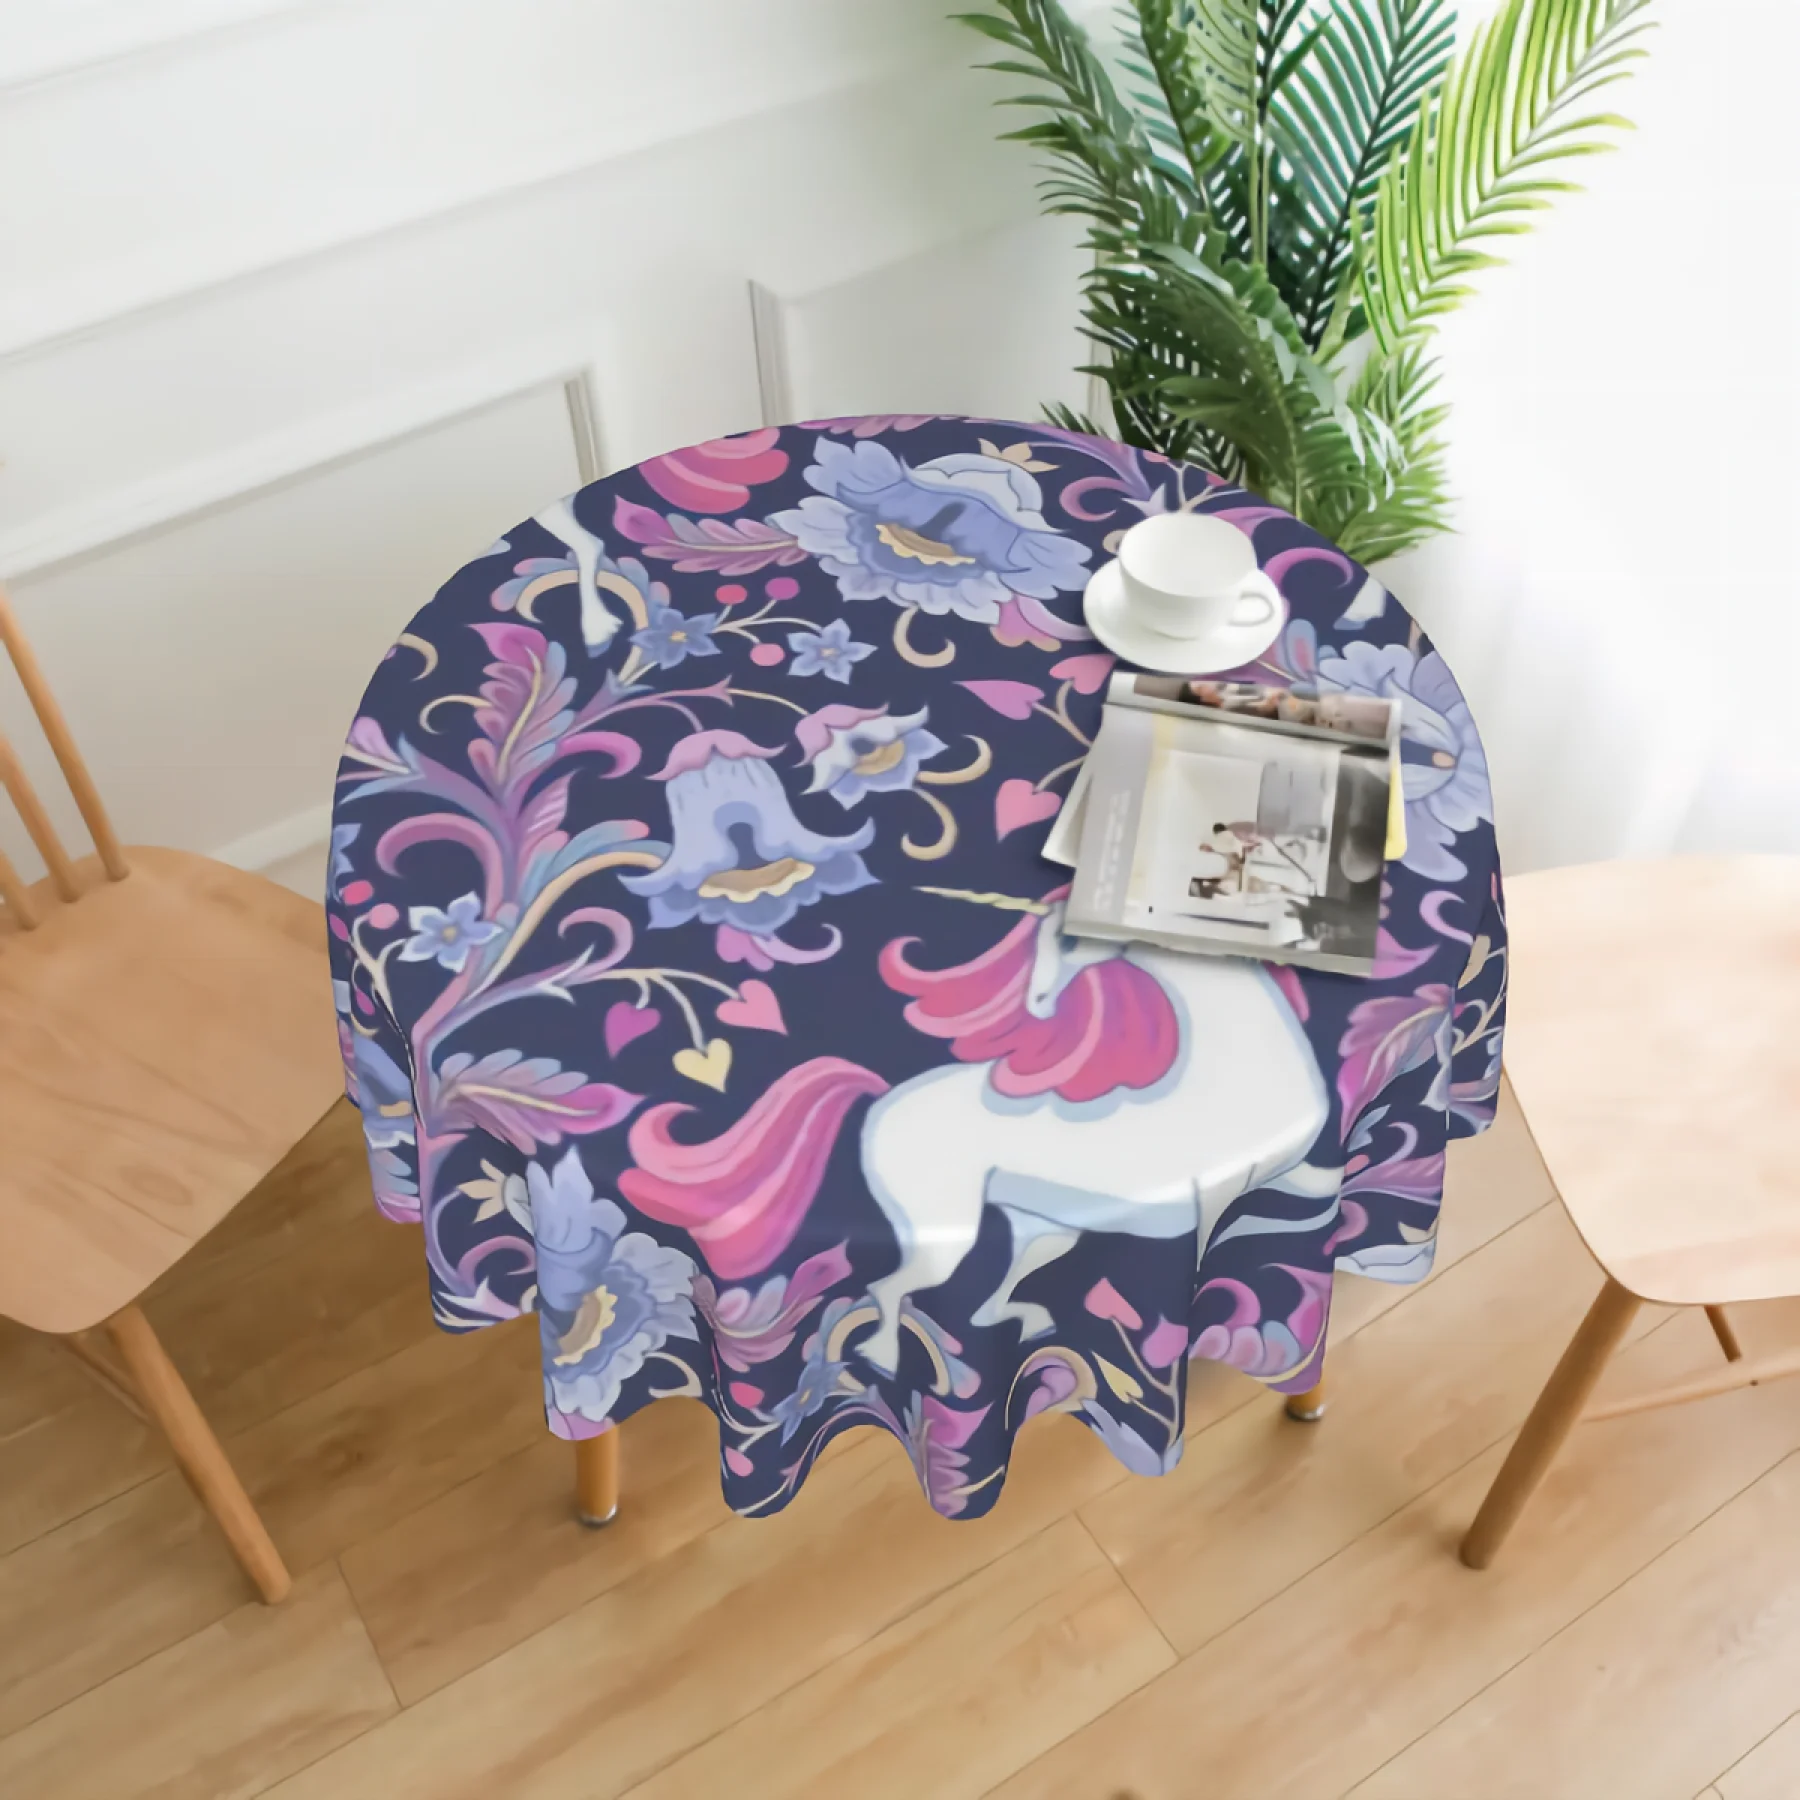 

White Unicorns in the Floral Garden Tablecloth 60 Inch Round Tablecloth Polyester for Party Picnic Tabletop Dining Room